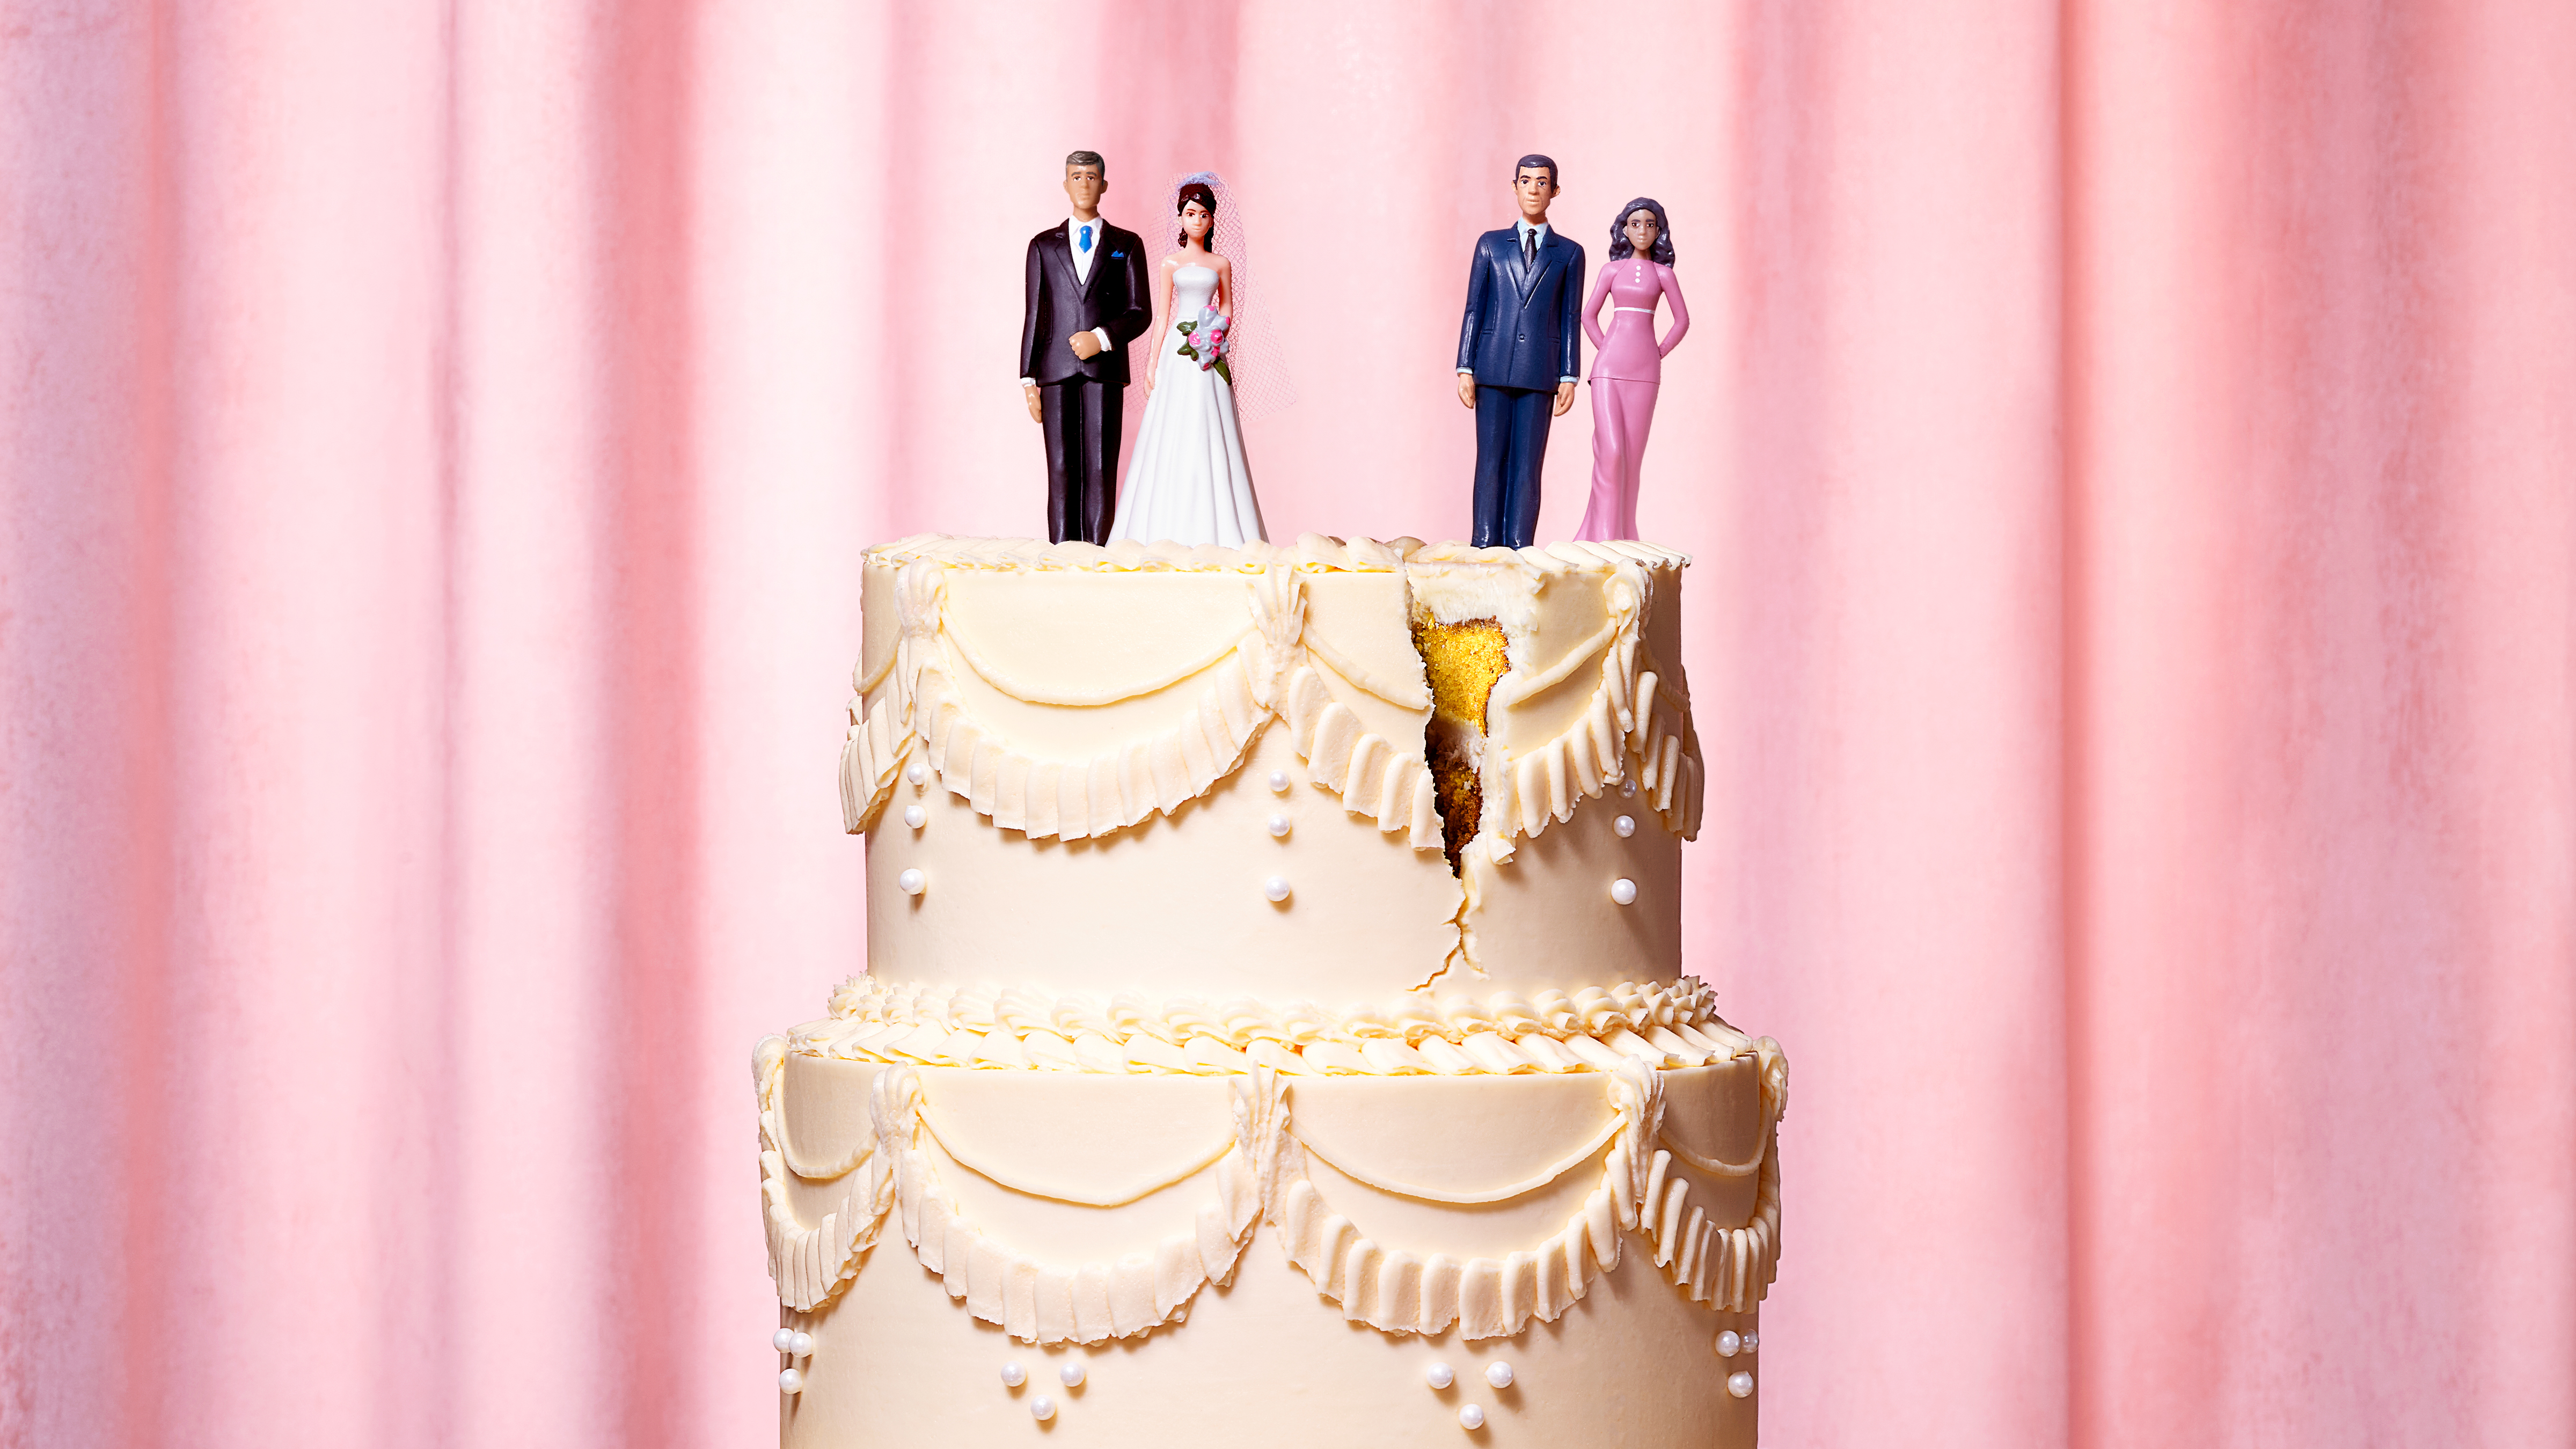 Male-female doll couples (one pair in wedding outfits, the other in evening wear) atop a cracked wedding cake